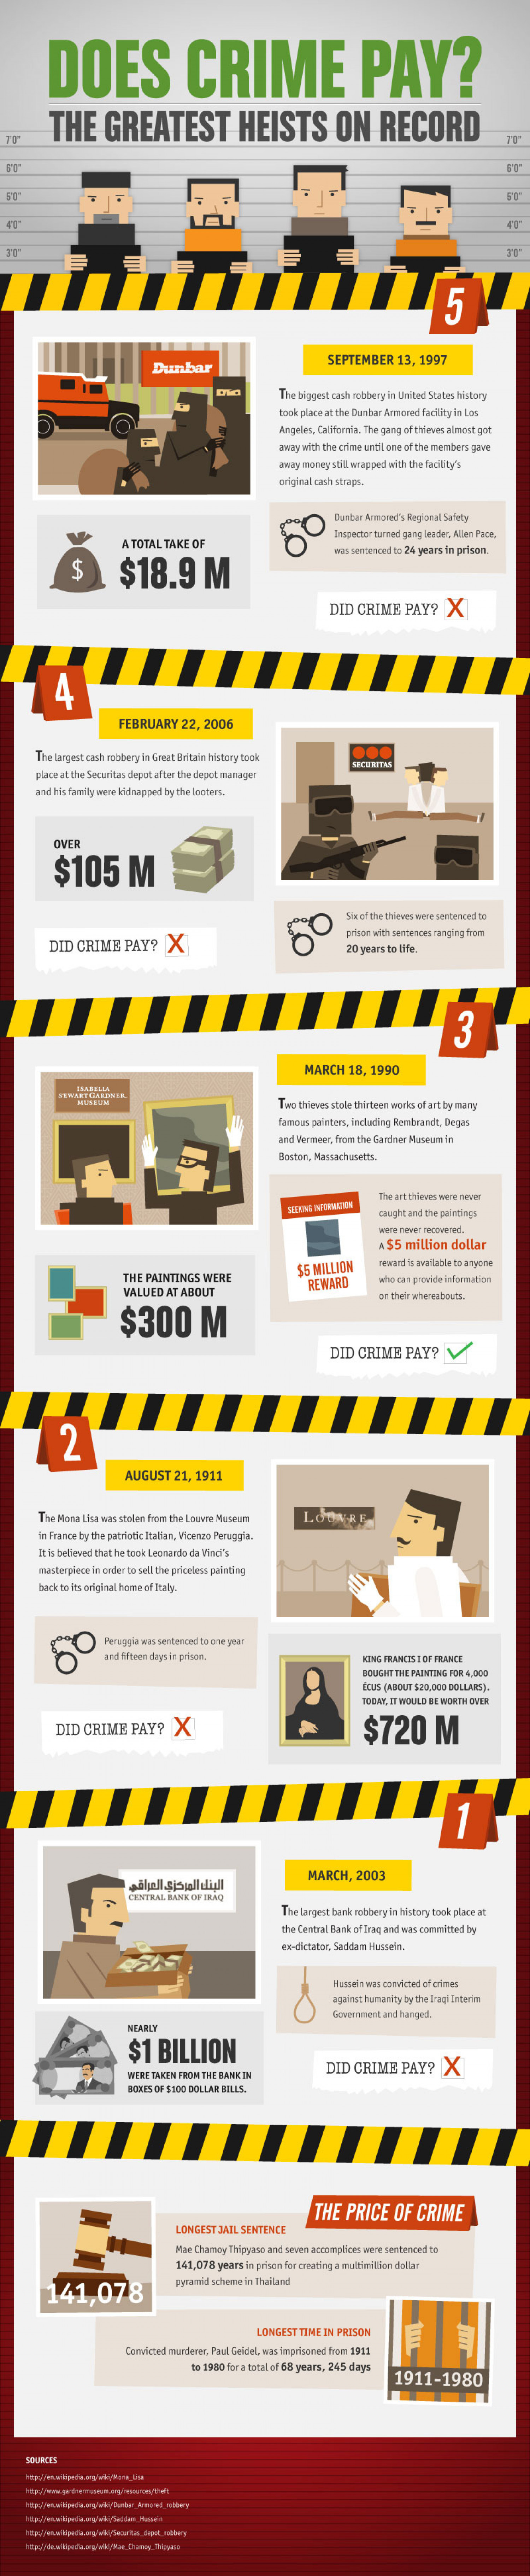 Does Crime Pay? Infographic